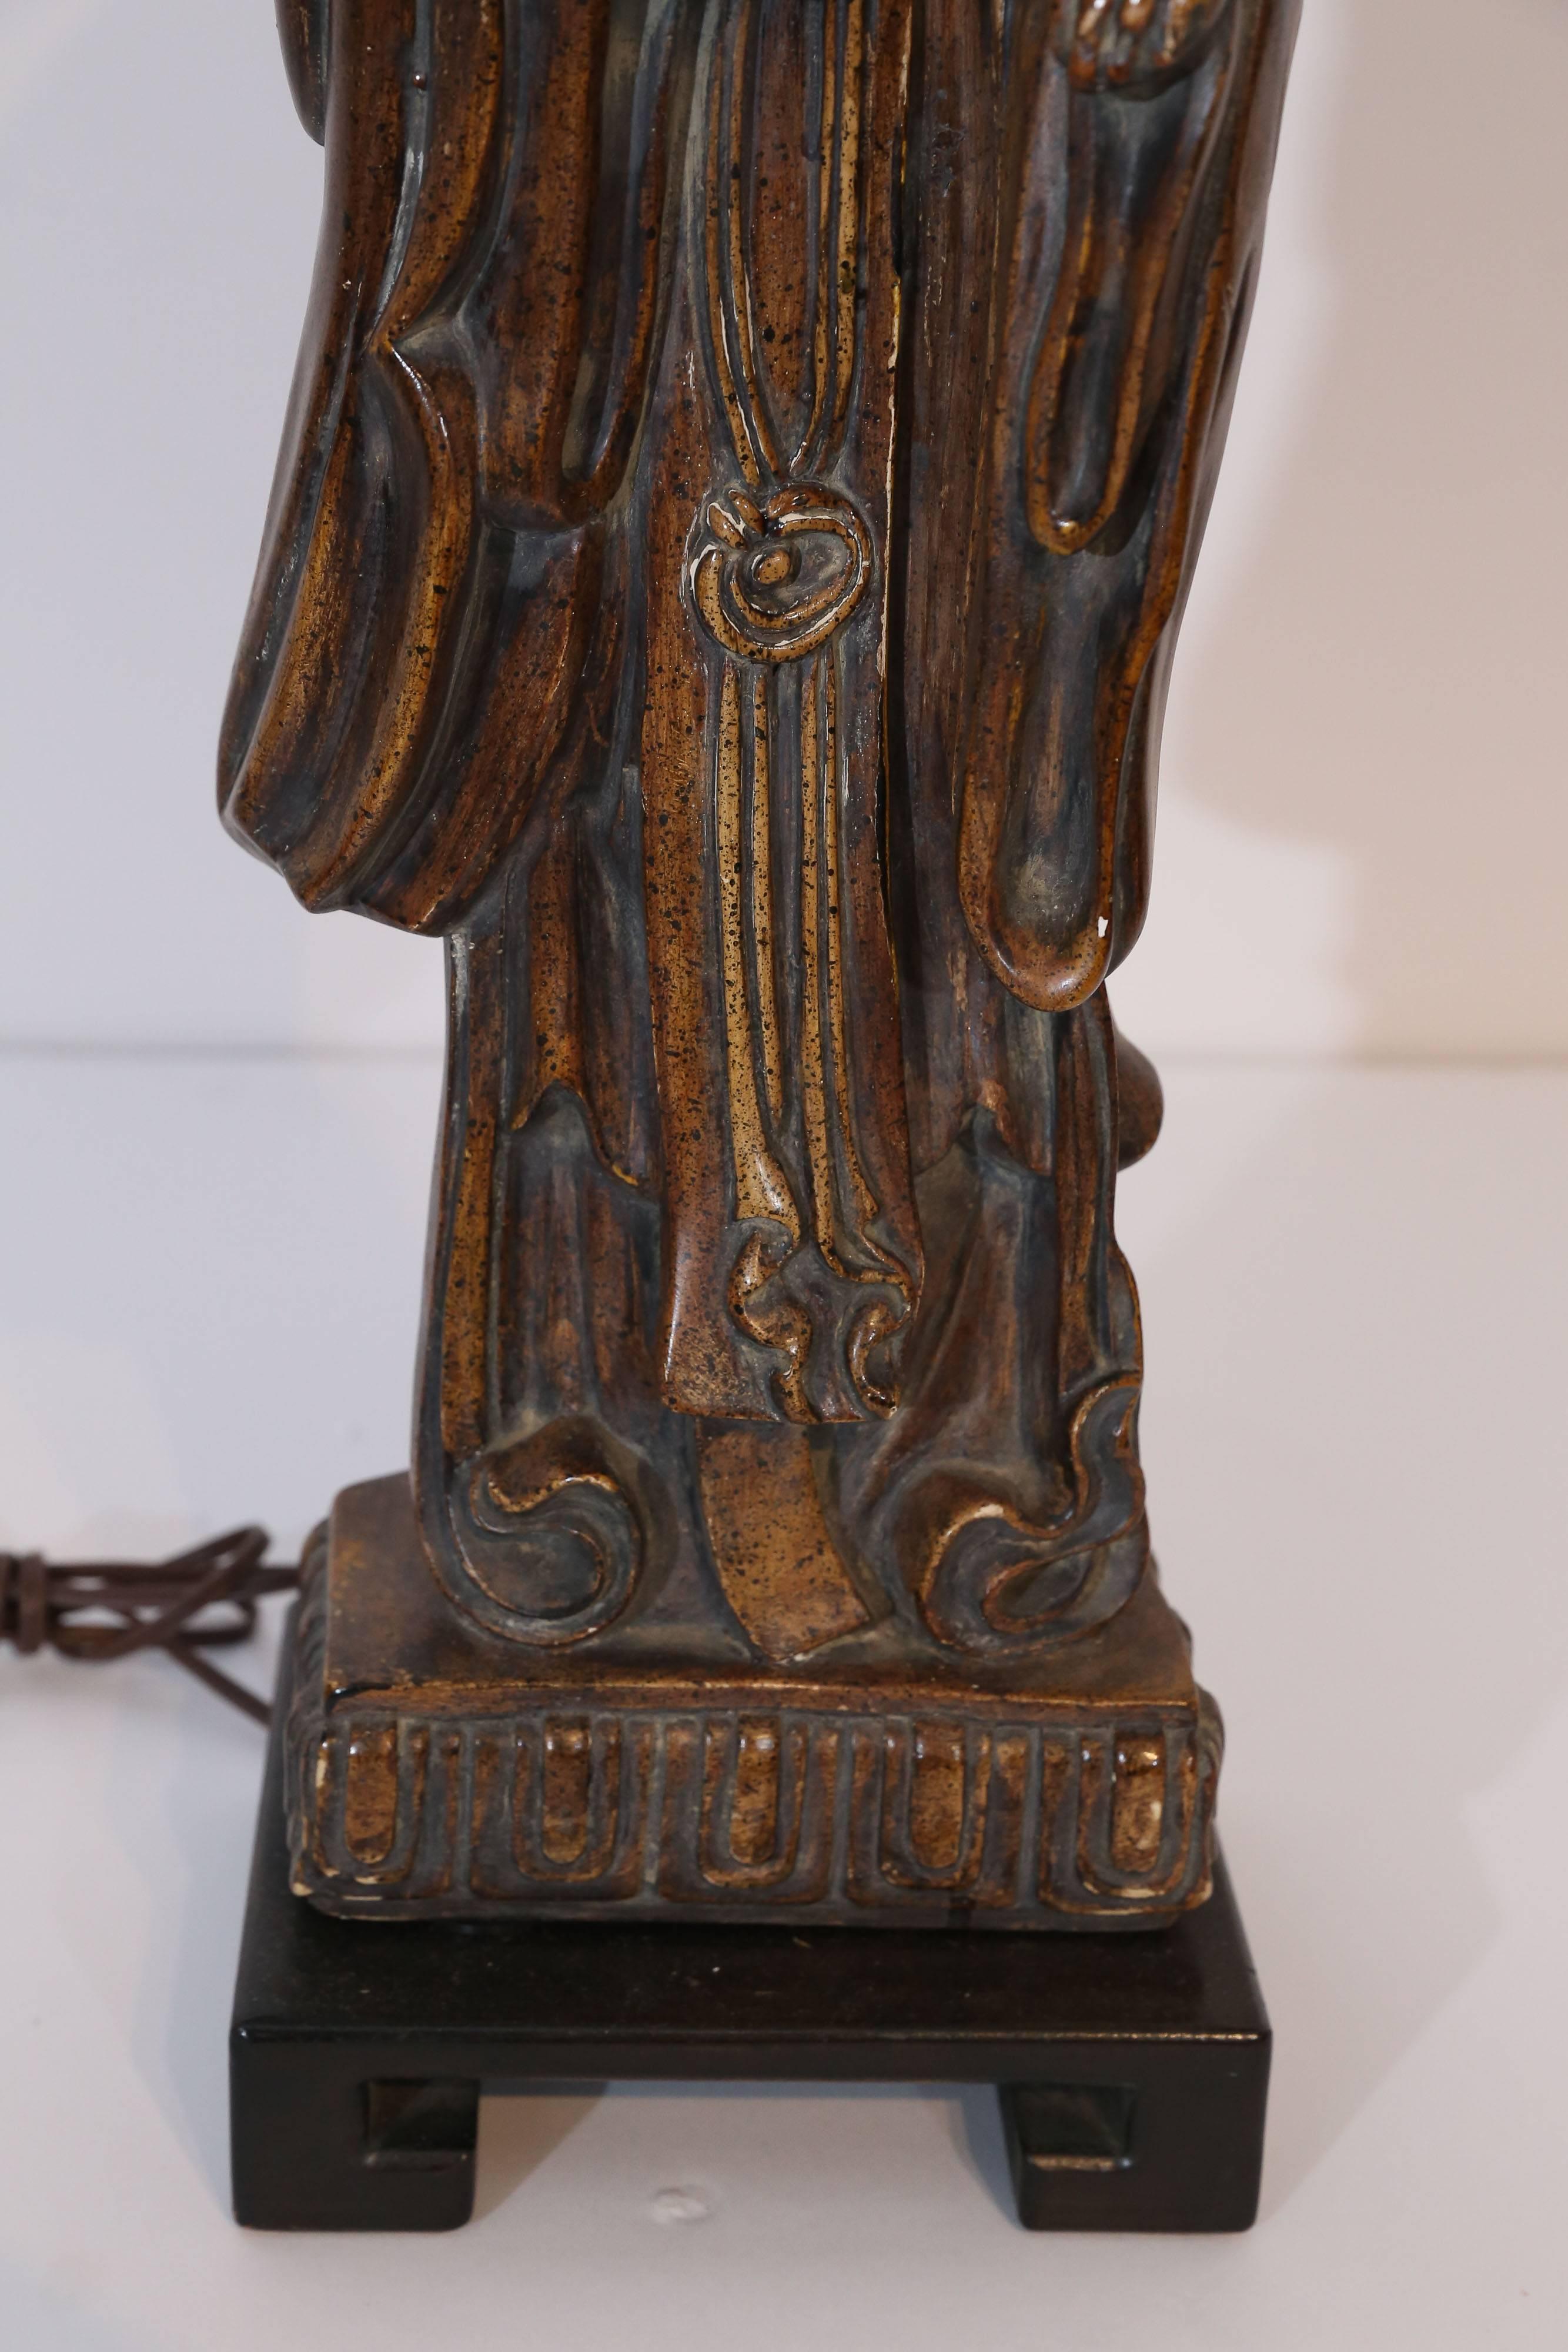 Frederick Cooper resin carved oriental figure sits upon a rectangular base. Painted to resemble a mahogany wood it is distressed bringing out shades of brown and gold. The lamp stands 28.5